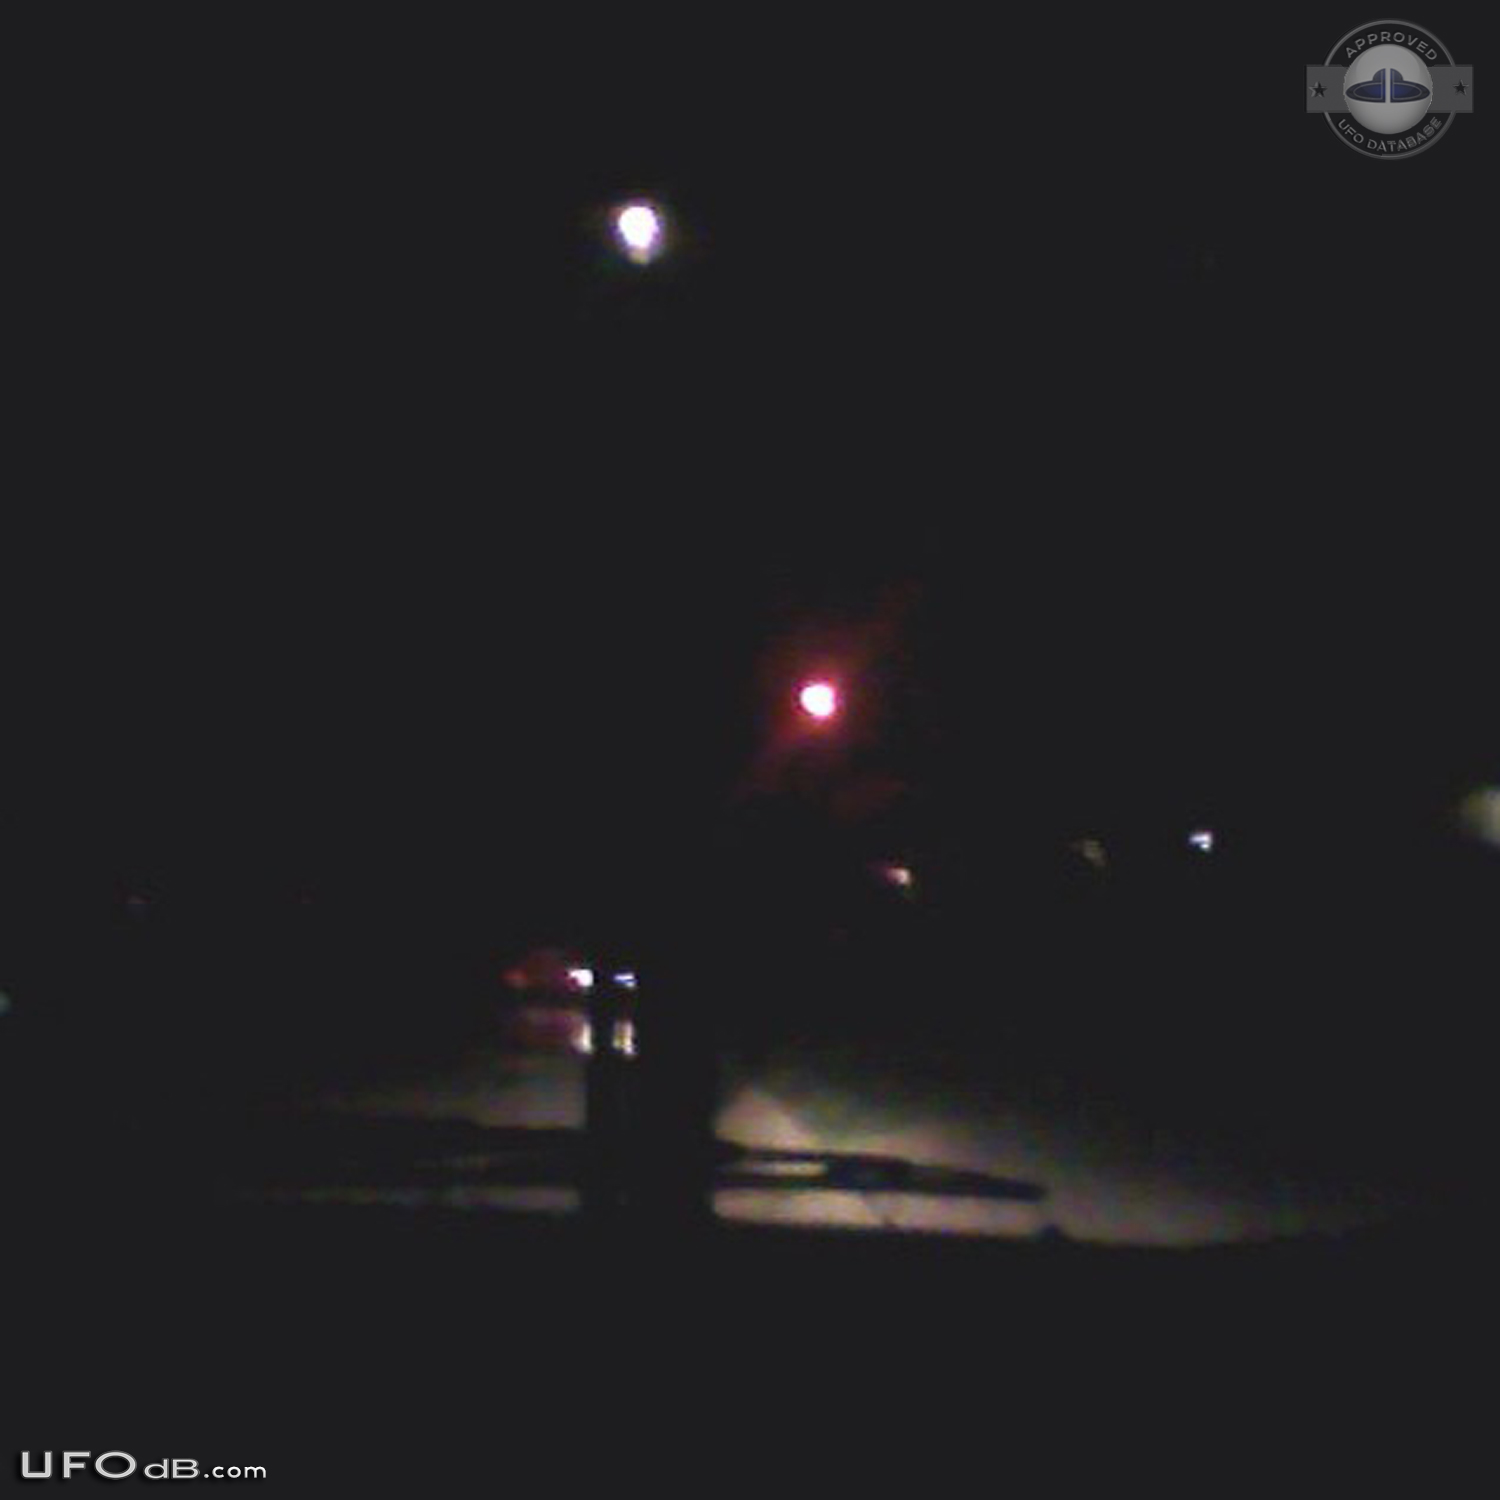 Bright glowing hovering sphere UFO over St Louis Missouri - 2014 UFO Picture #560-1